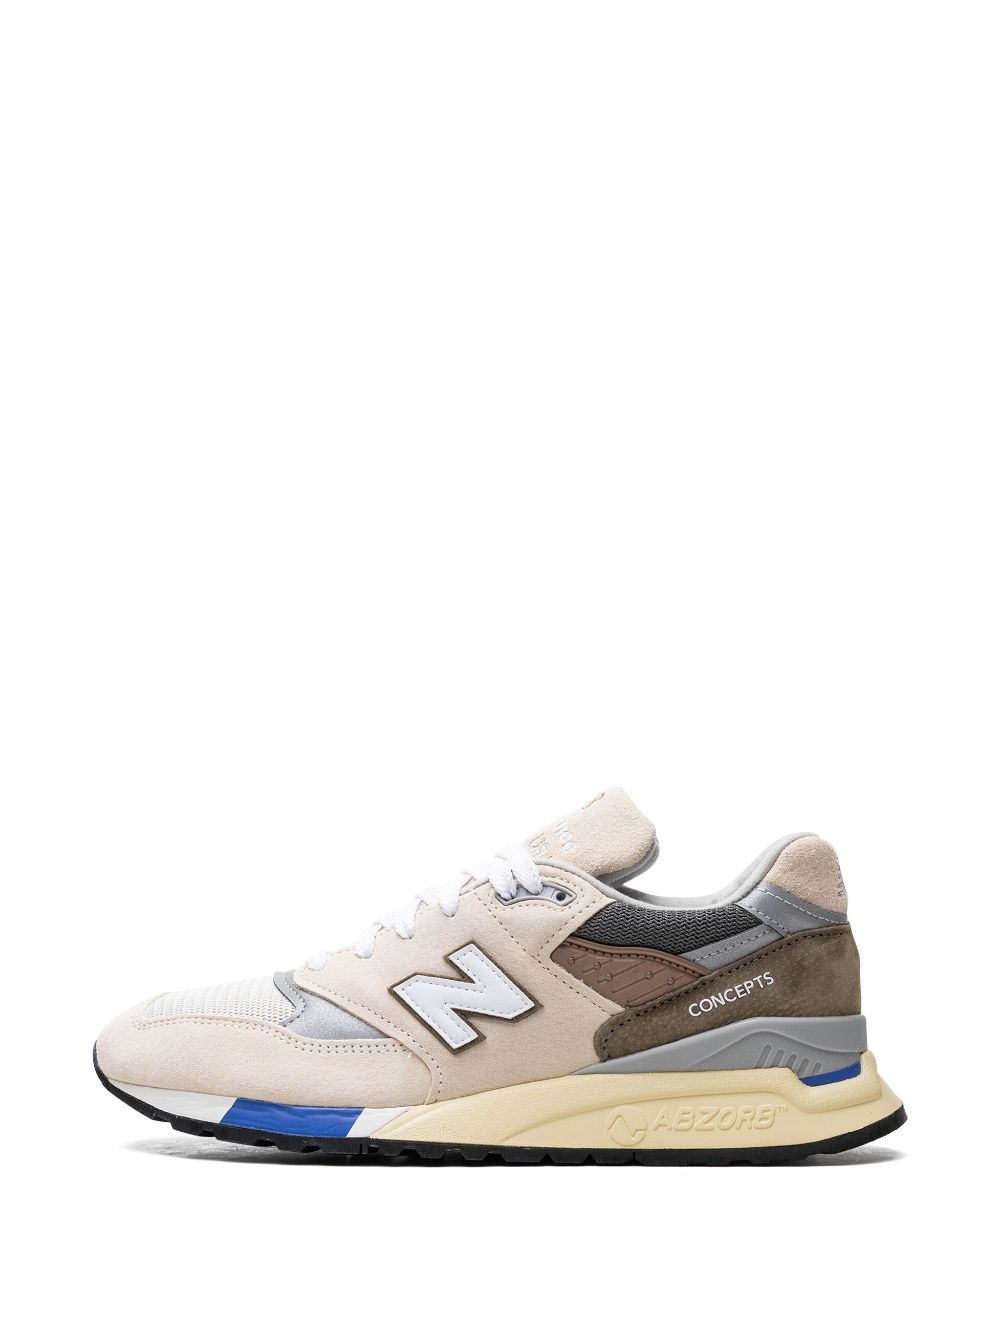 x Concepts 998 "C-Note" sneakers - 5